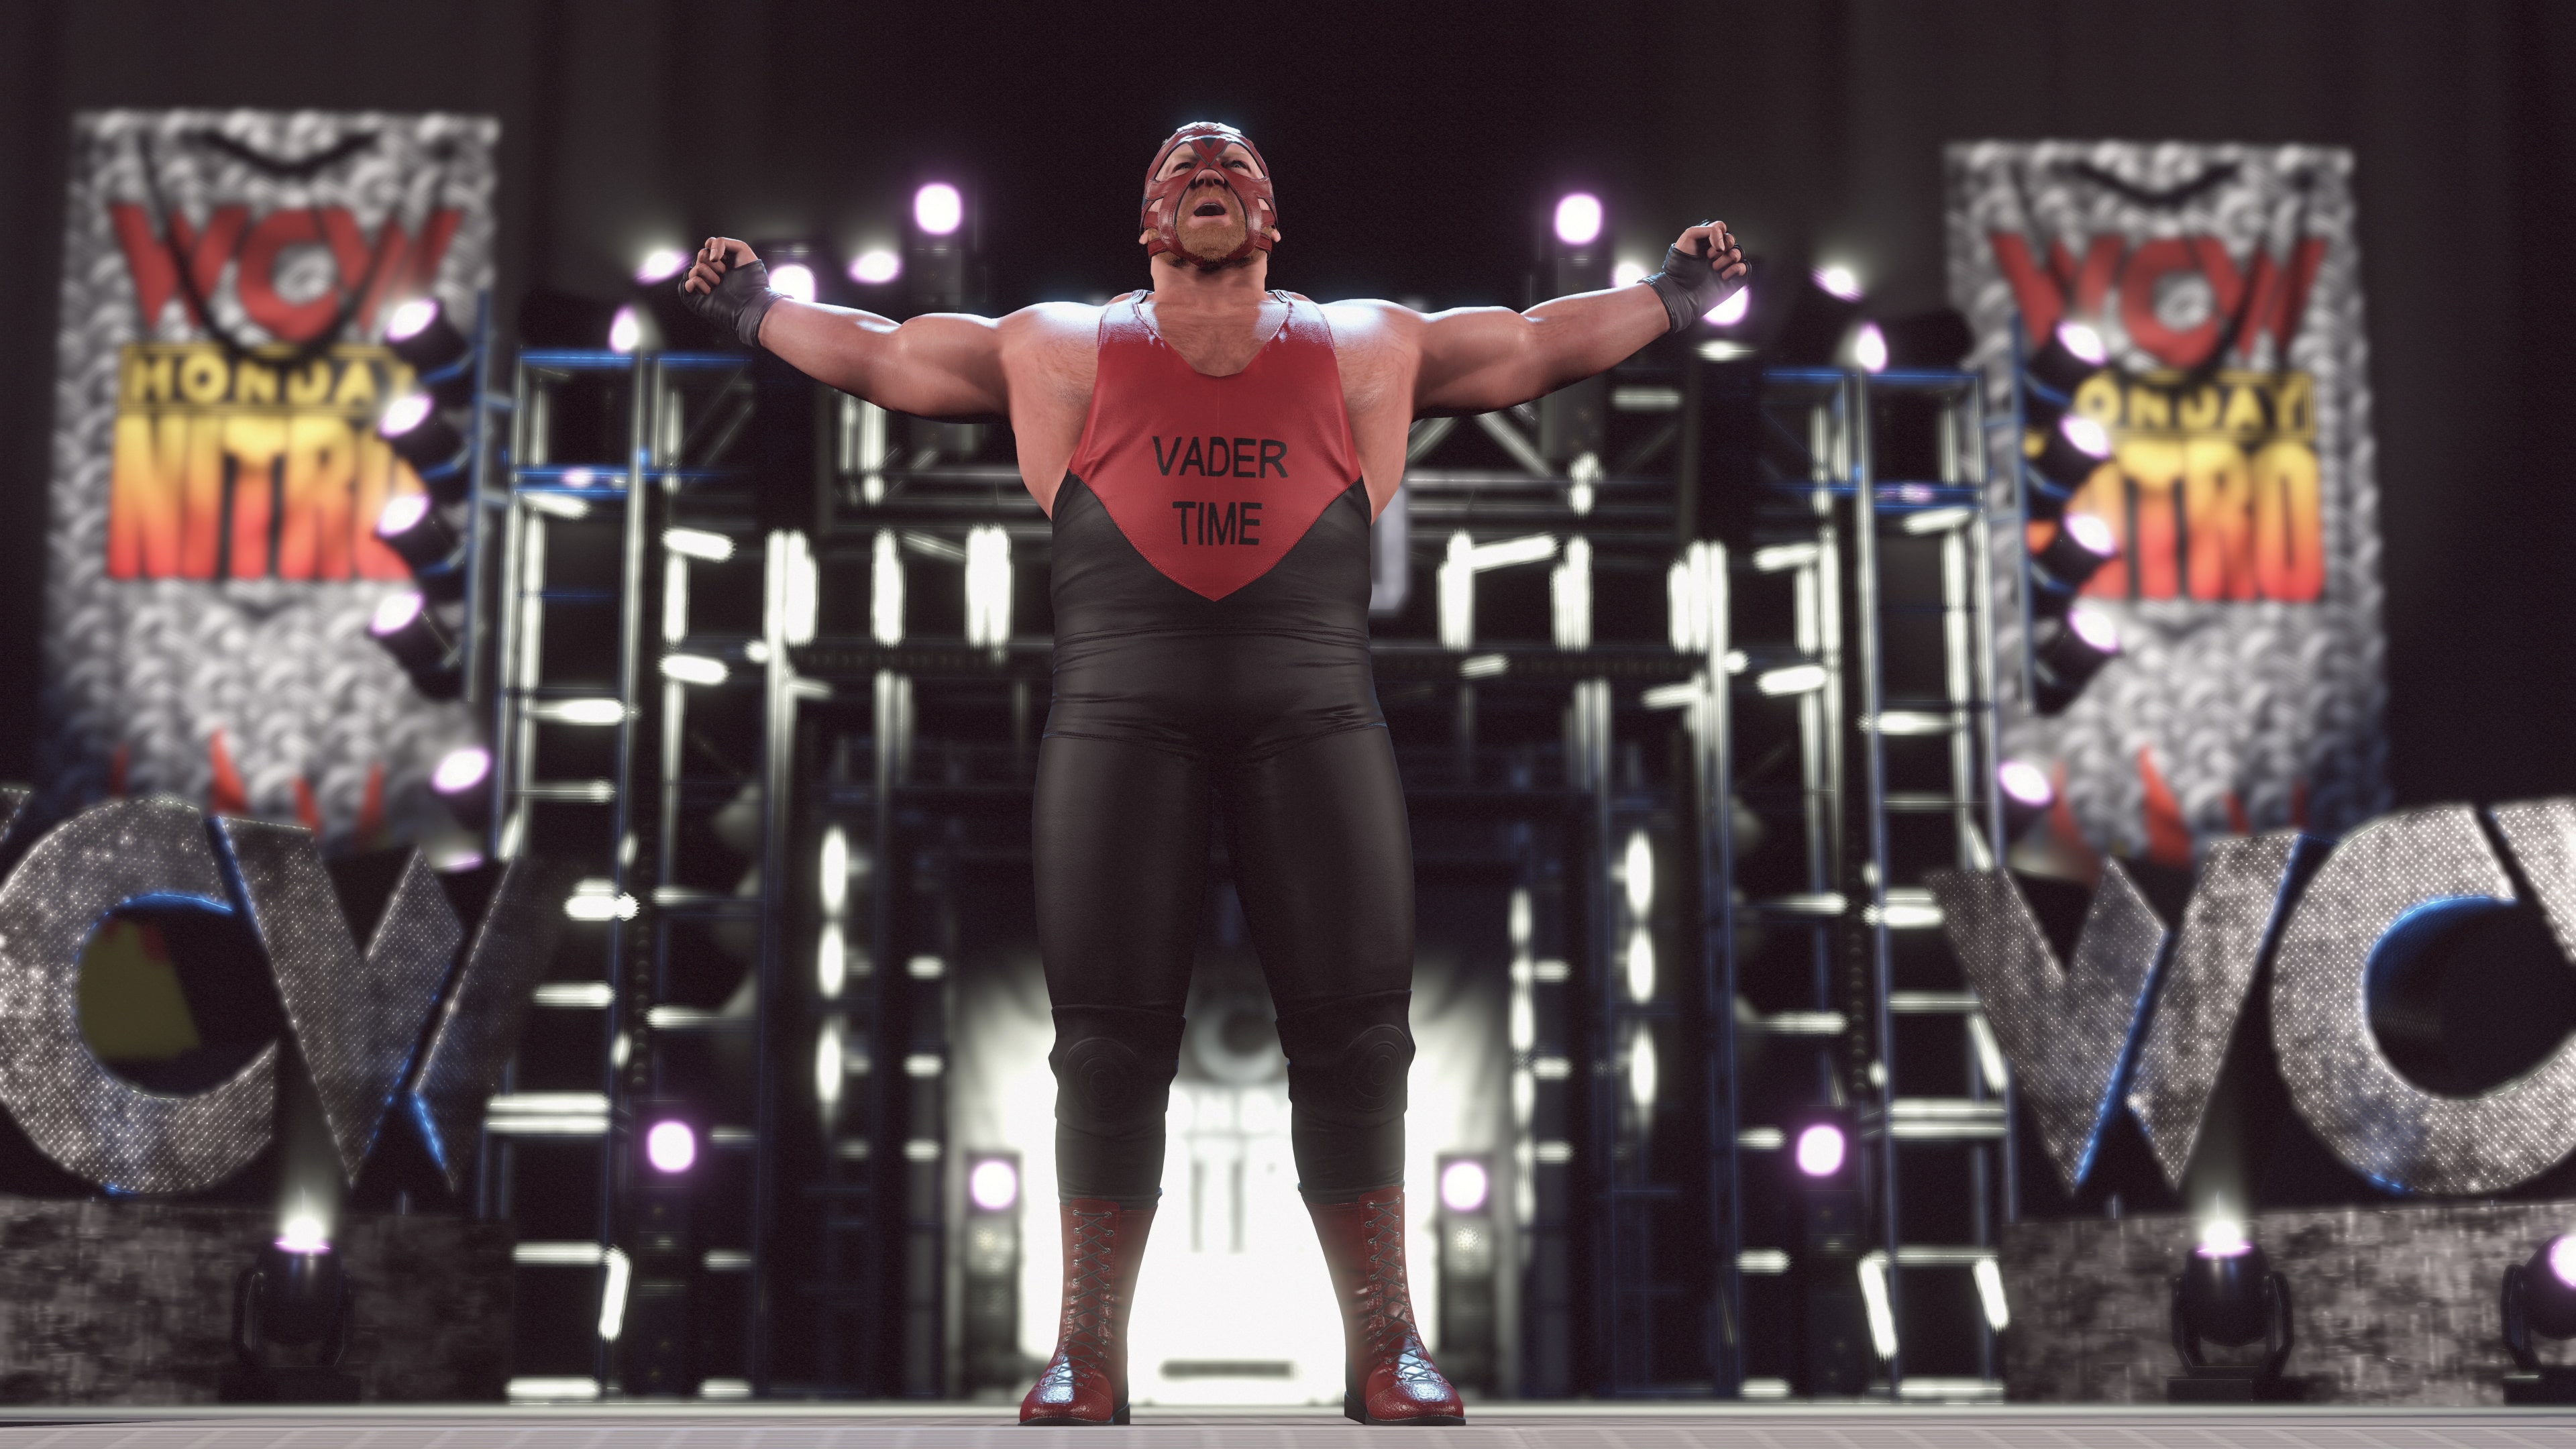 WWE® 2K22 Most Wanted Pack is Comin' to Getcha Today